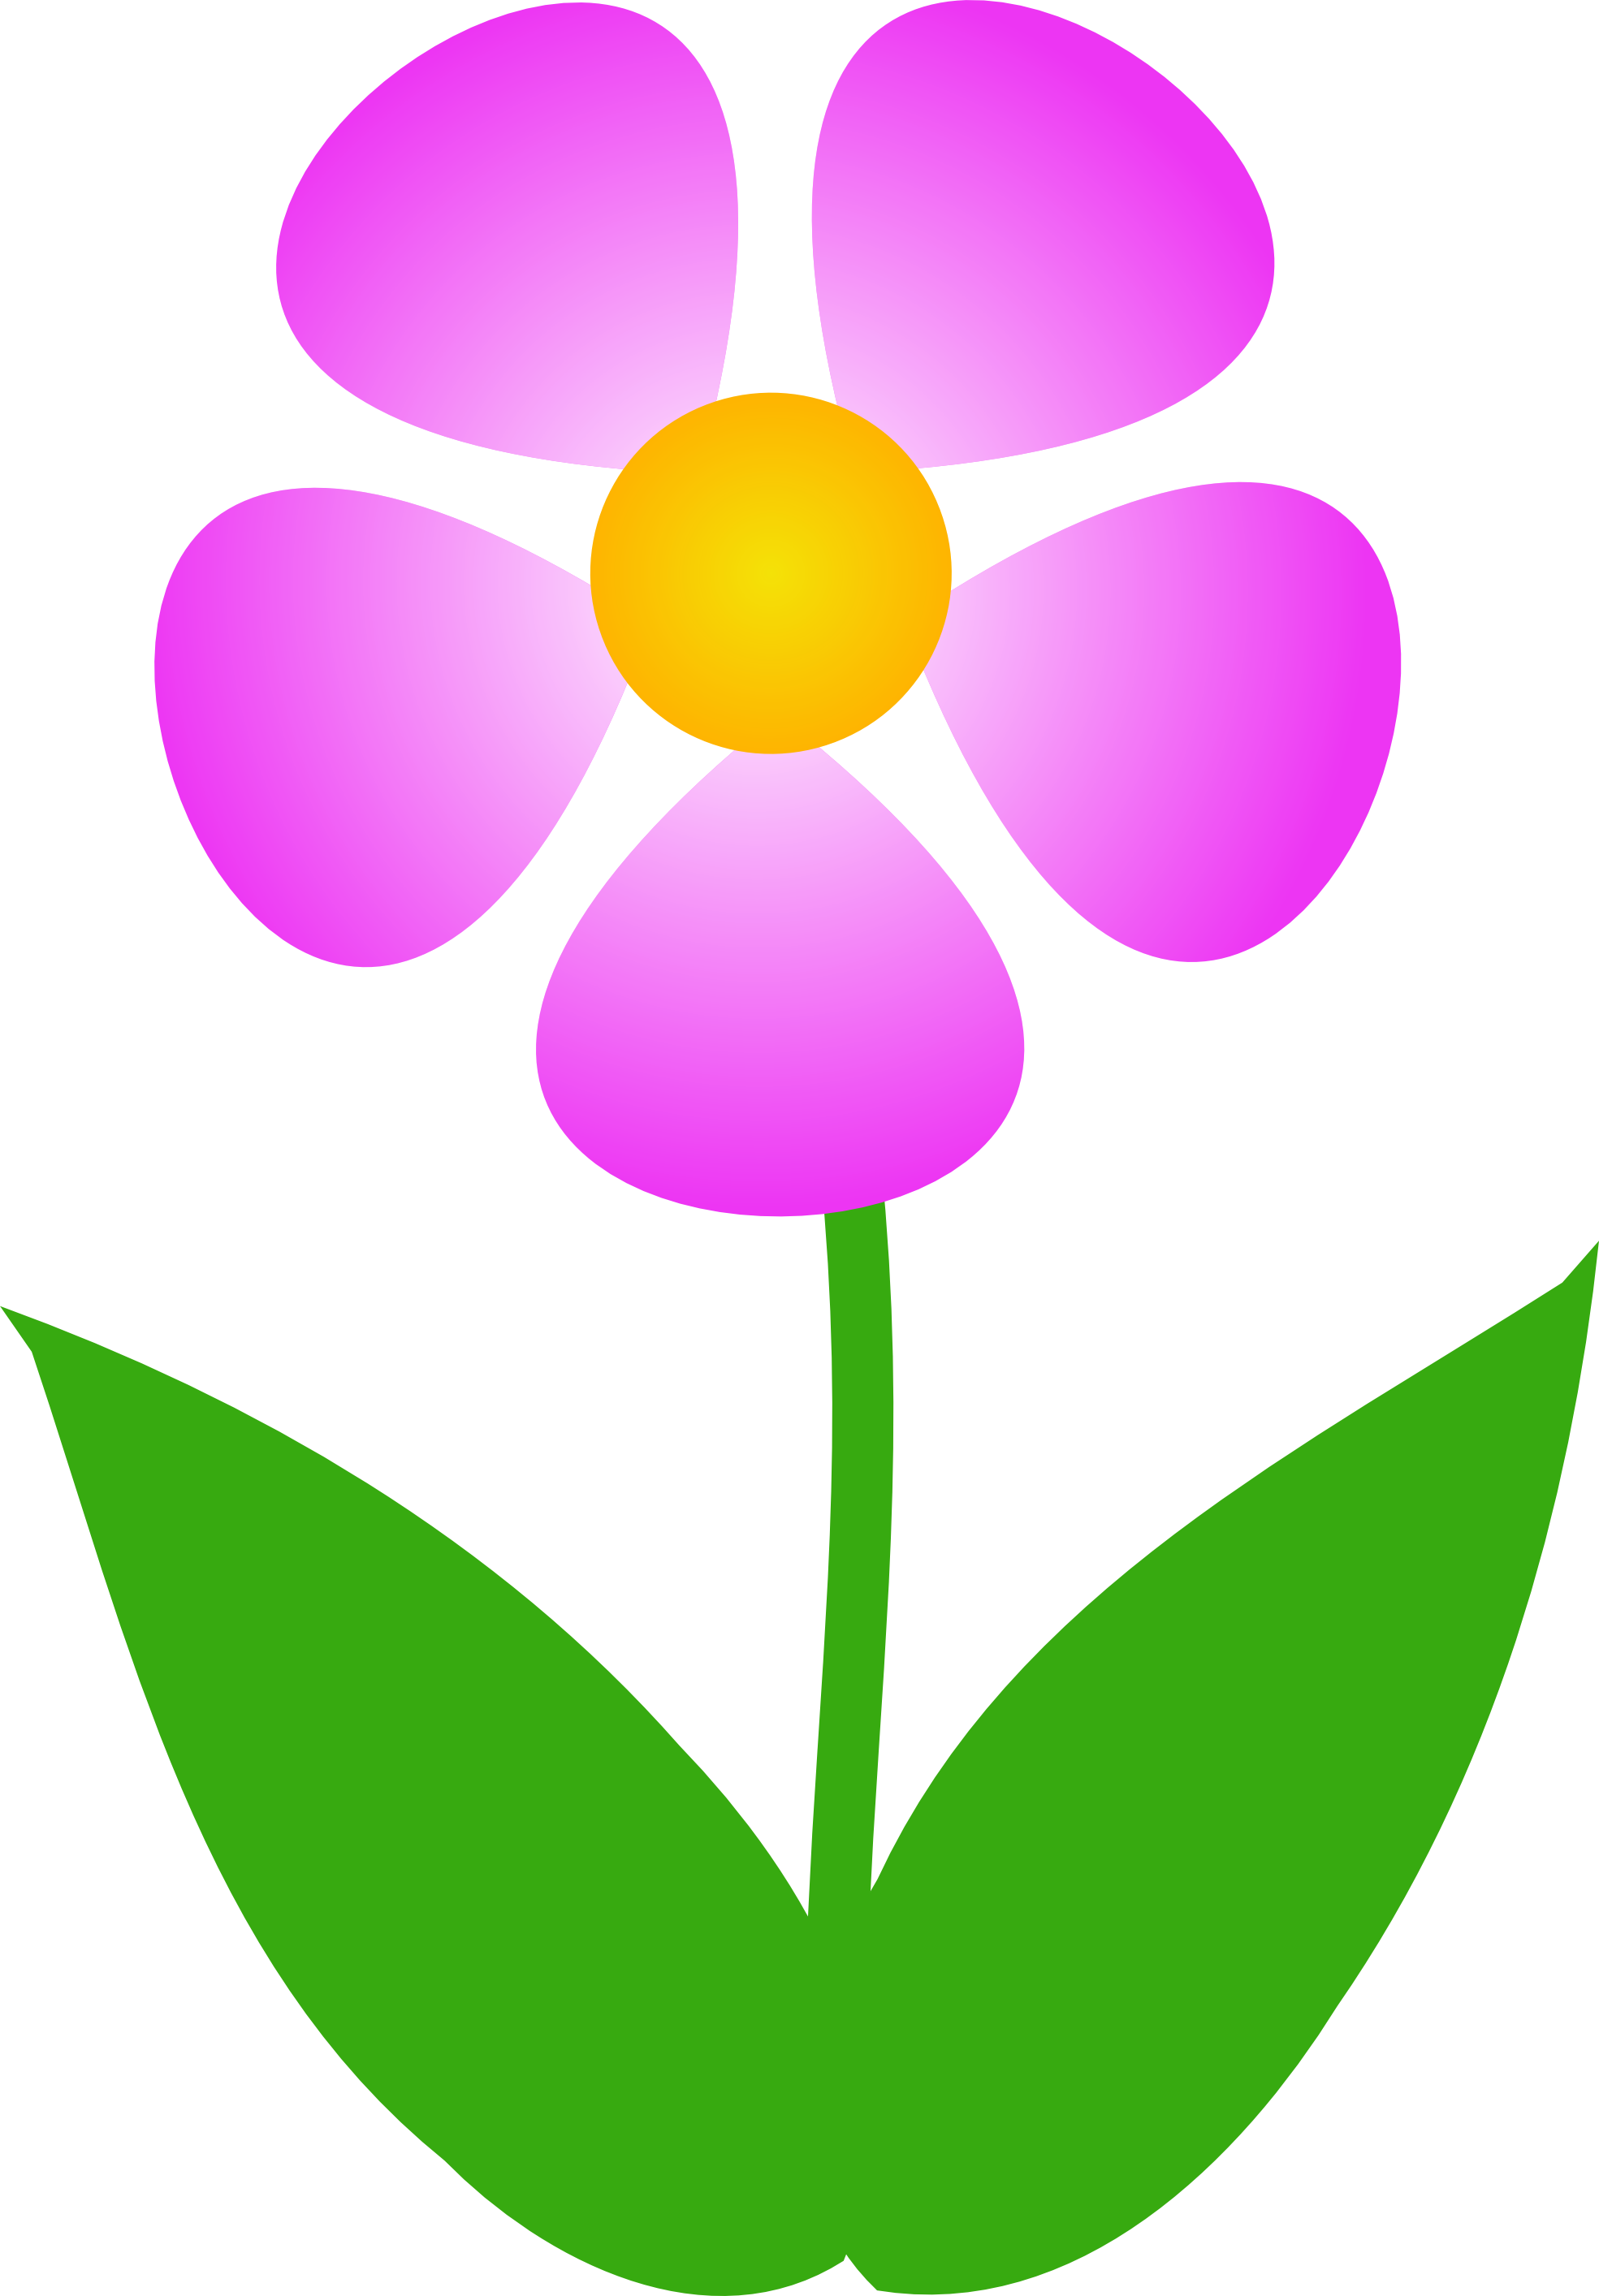 Free clipart images of flowers flower clip art pictures image 1